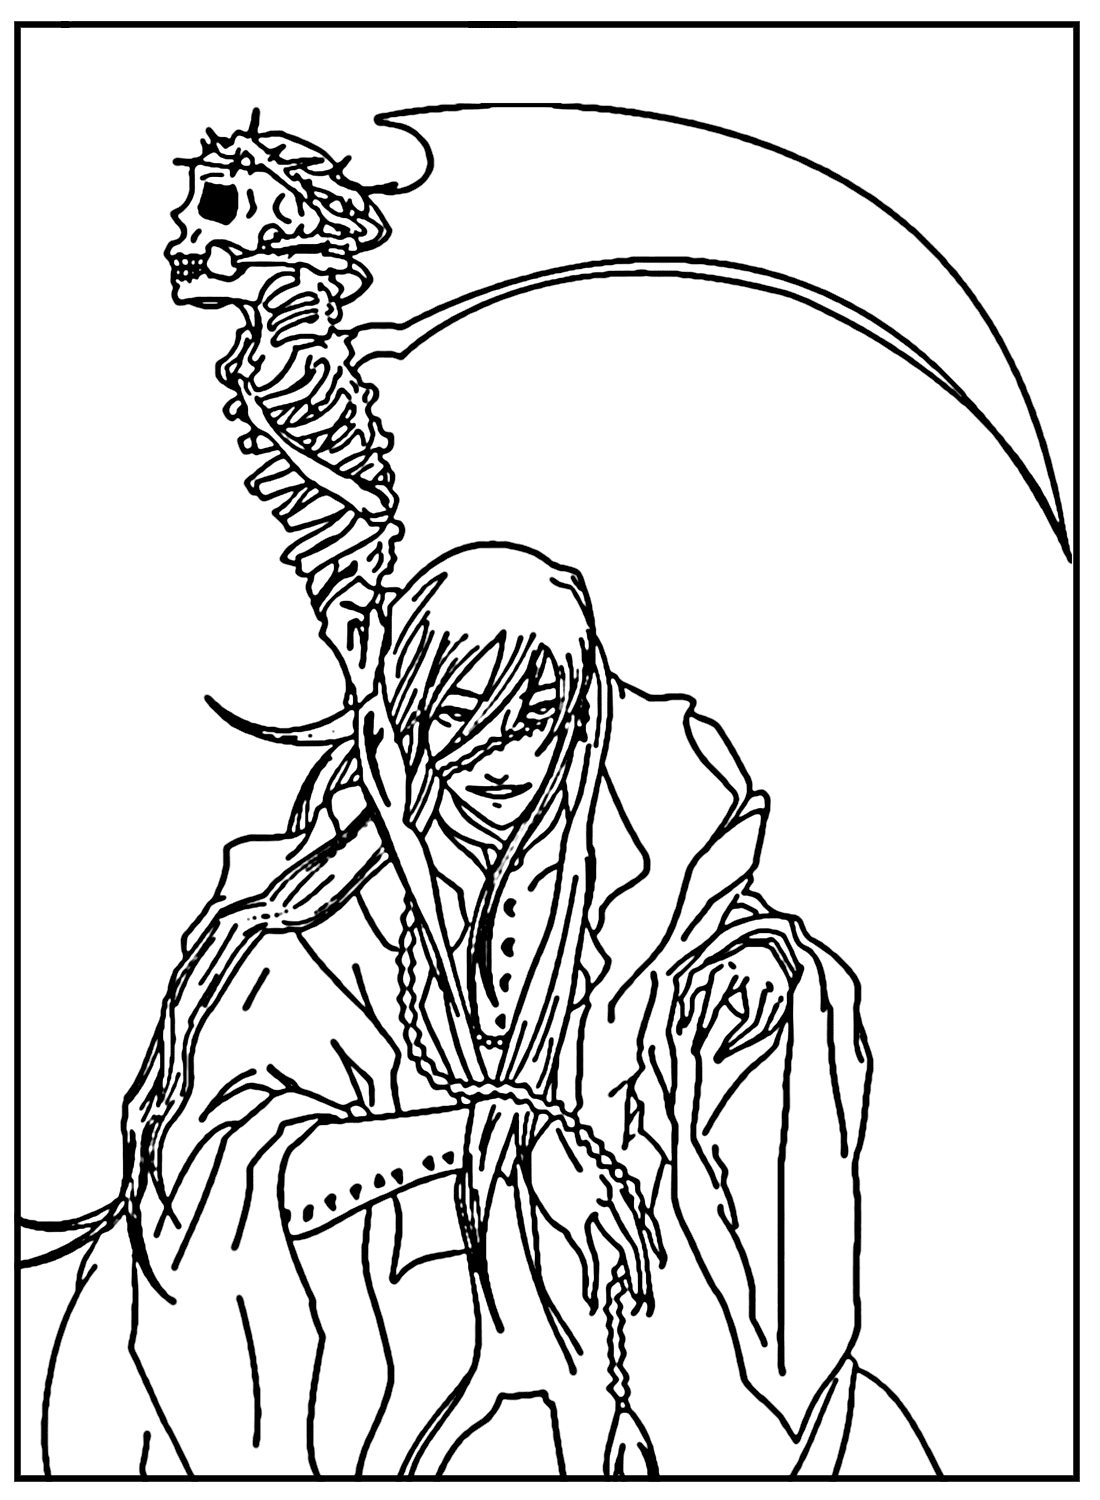 Undertaker From Black Butler Coloring Pages